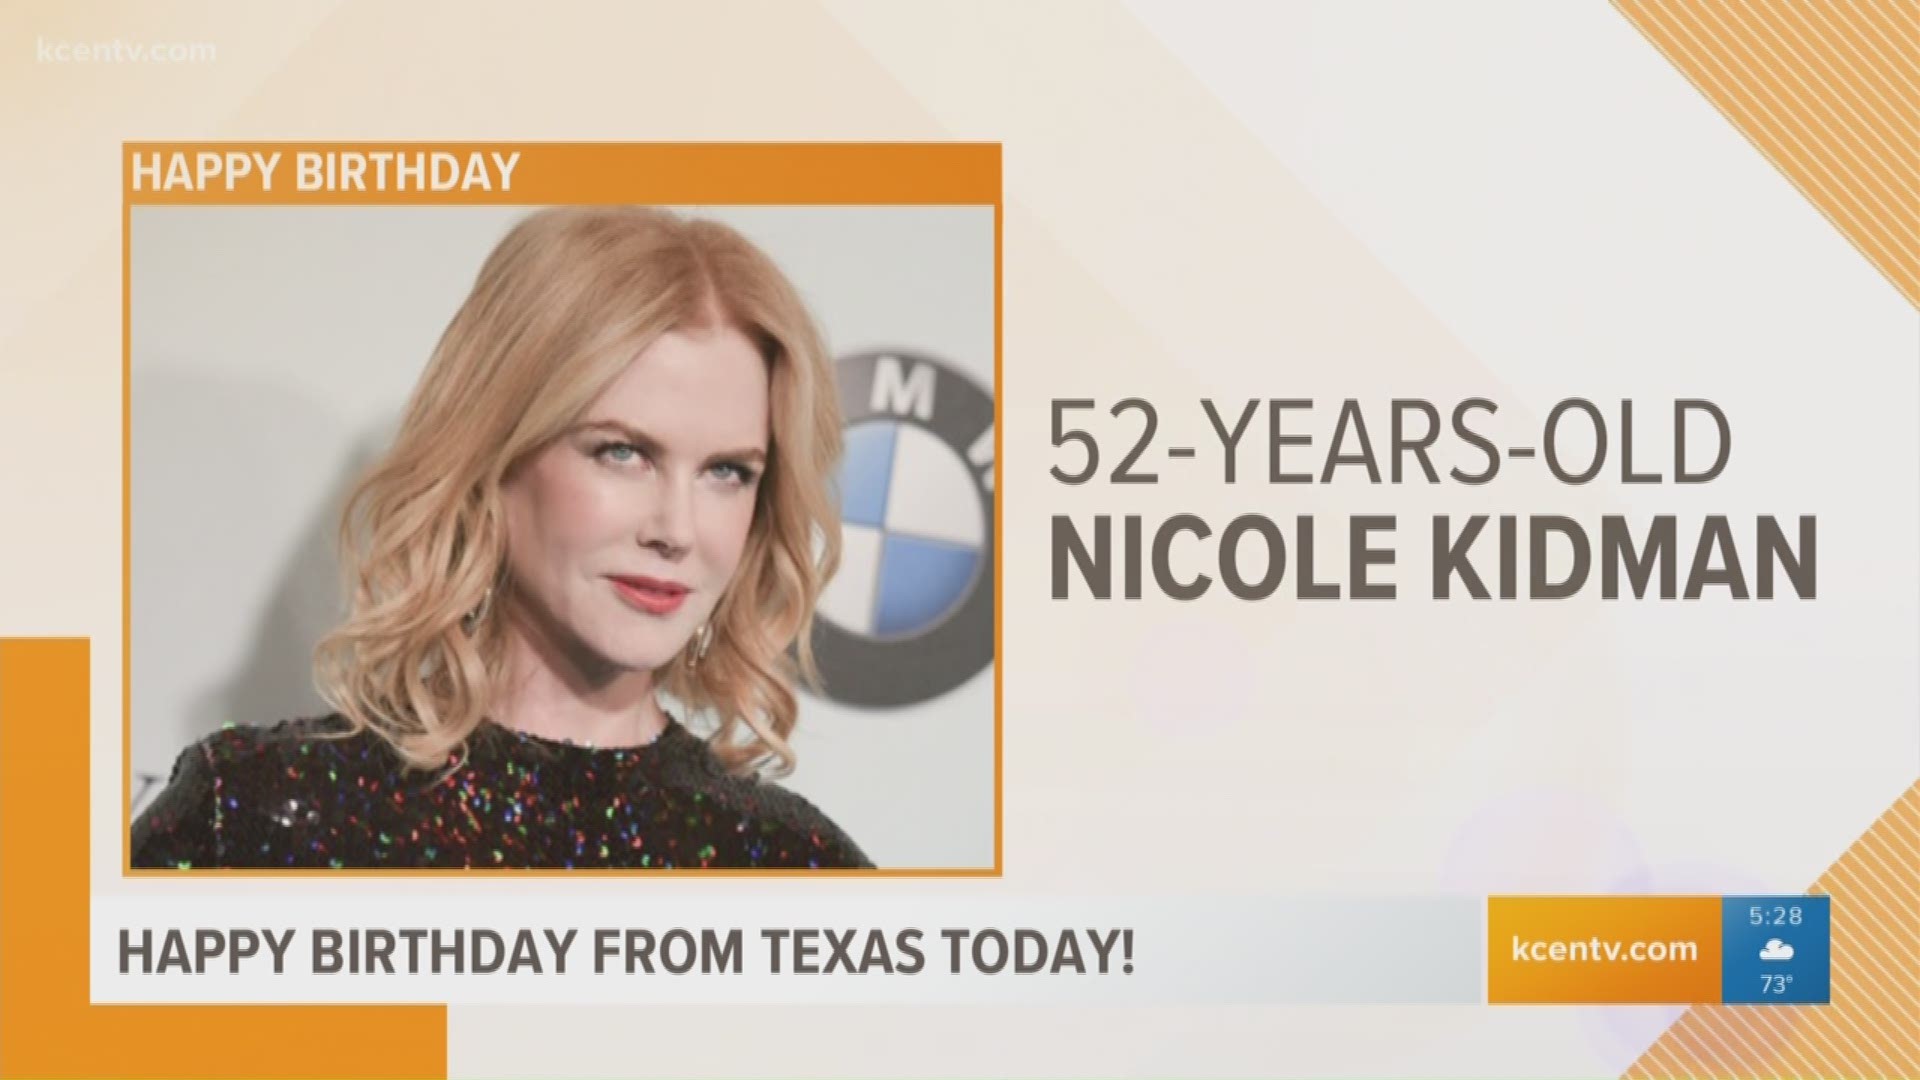 Happy birthday to Nicole Kidman and all Central Texans born on June 20.